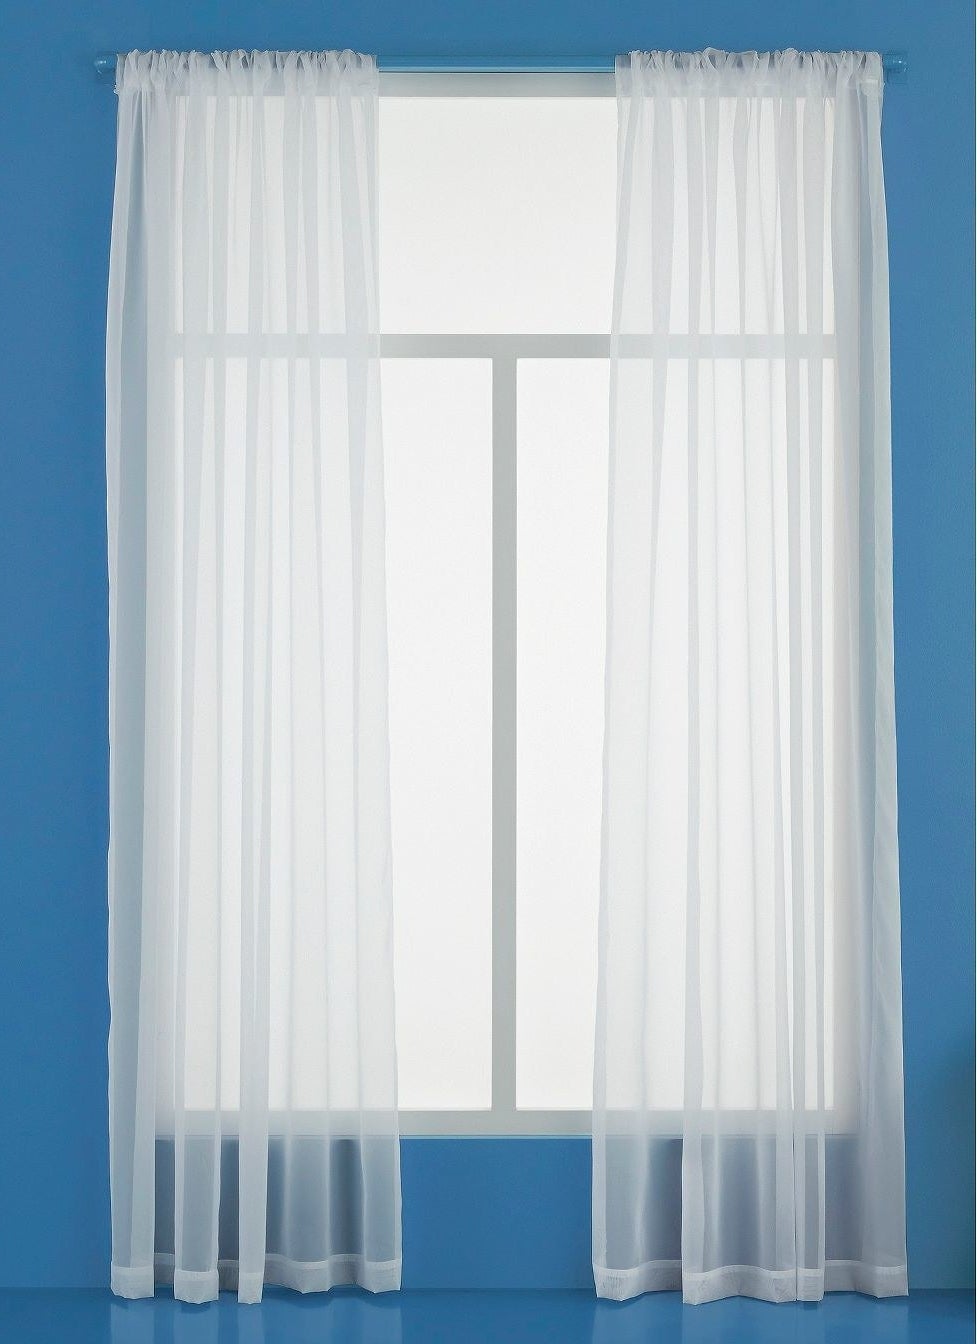 A set of sheer white curtains on a window in a blue room